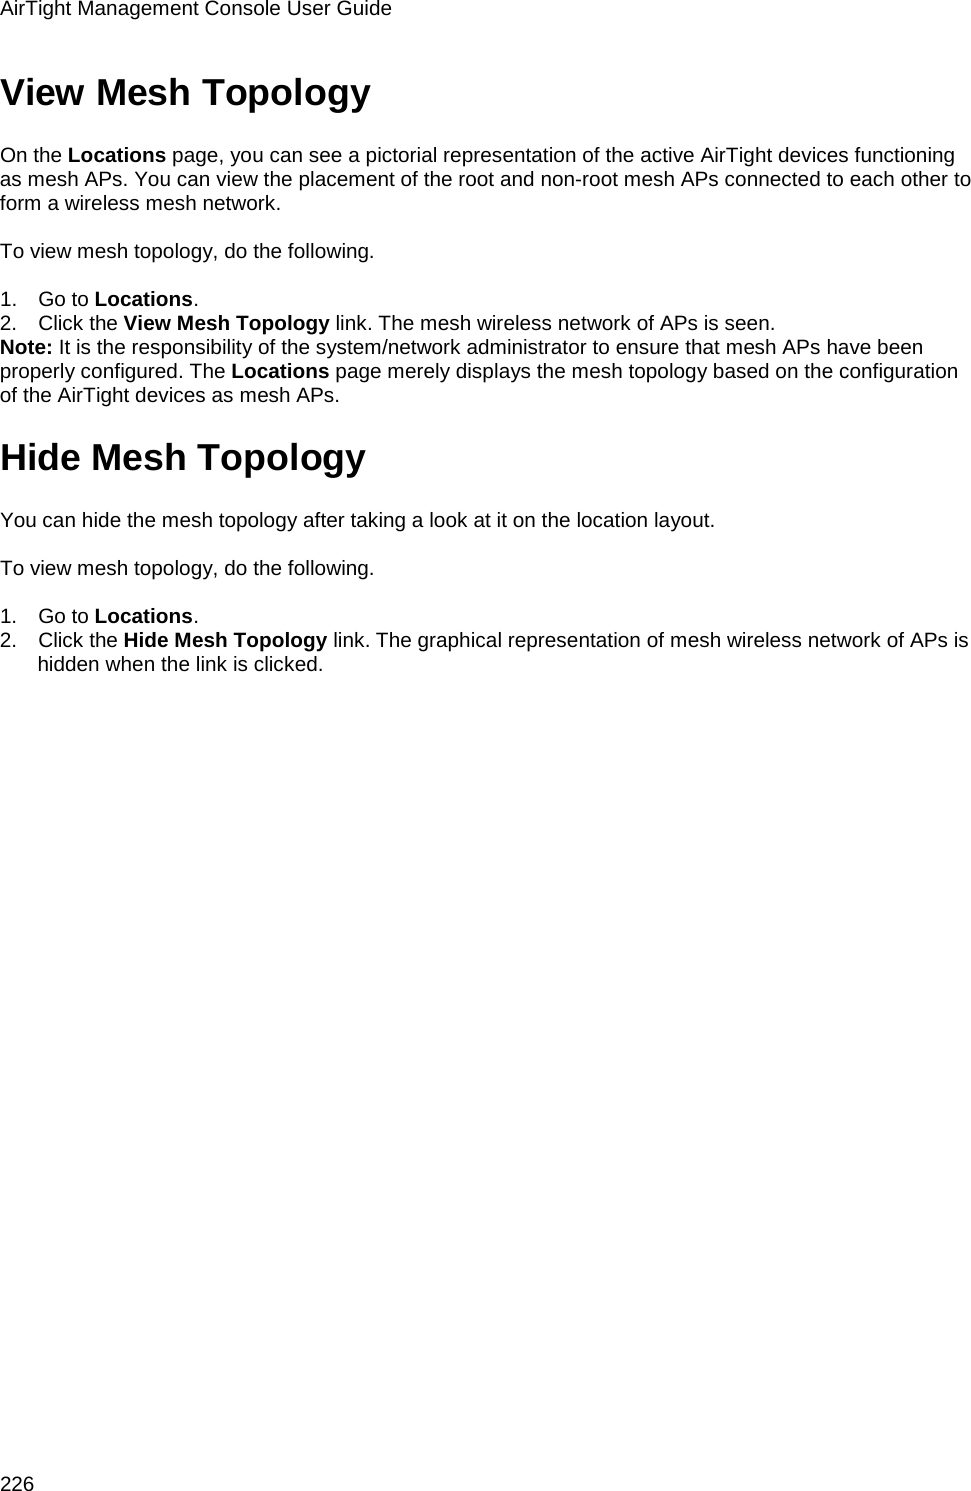 AirTight Management Console User Guide 226 View Mesh Topology On the Locations page, you can see a pictorial representation of the active AirTight devices functioning as mesh APs. You can view the placement of the root and non-root mesh APs connected to each other to form a wireless mesh network.   To view mesh topology, do the following.   1.      Go to Locations.  2.      Click the View Mesh Topology link. The mesh wireless network of APs is seen. Note: It is the responsibility of the system/network administrator to ensure that mesh APs have been properly configured. The Locations page merely displays the mesh topology based on the configuration of the AirTight devices as mesh APs. Hide Mesh Topology You can hide the mesh topology after taking a look at it on the location layout.   To view mesh topology, do the following.   1.      Go to Locations.  2.      Click the Hide Mesh Topology link. The graphical representation of mesh wireless network of APs is hidden when the link is clicked. 